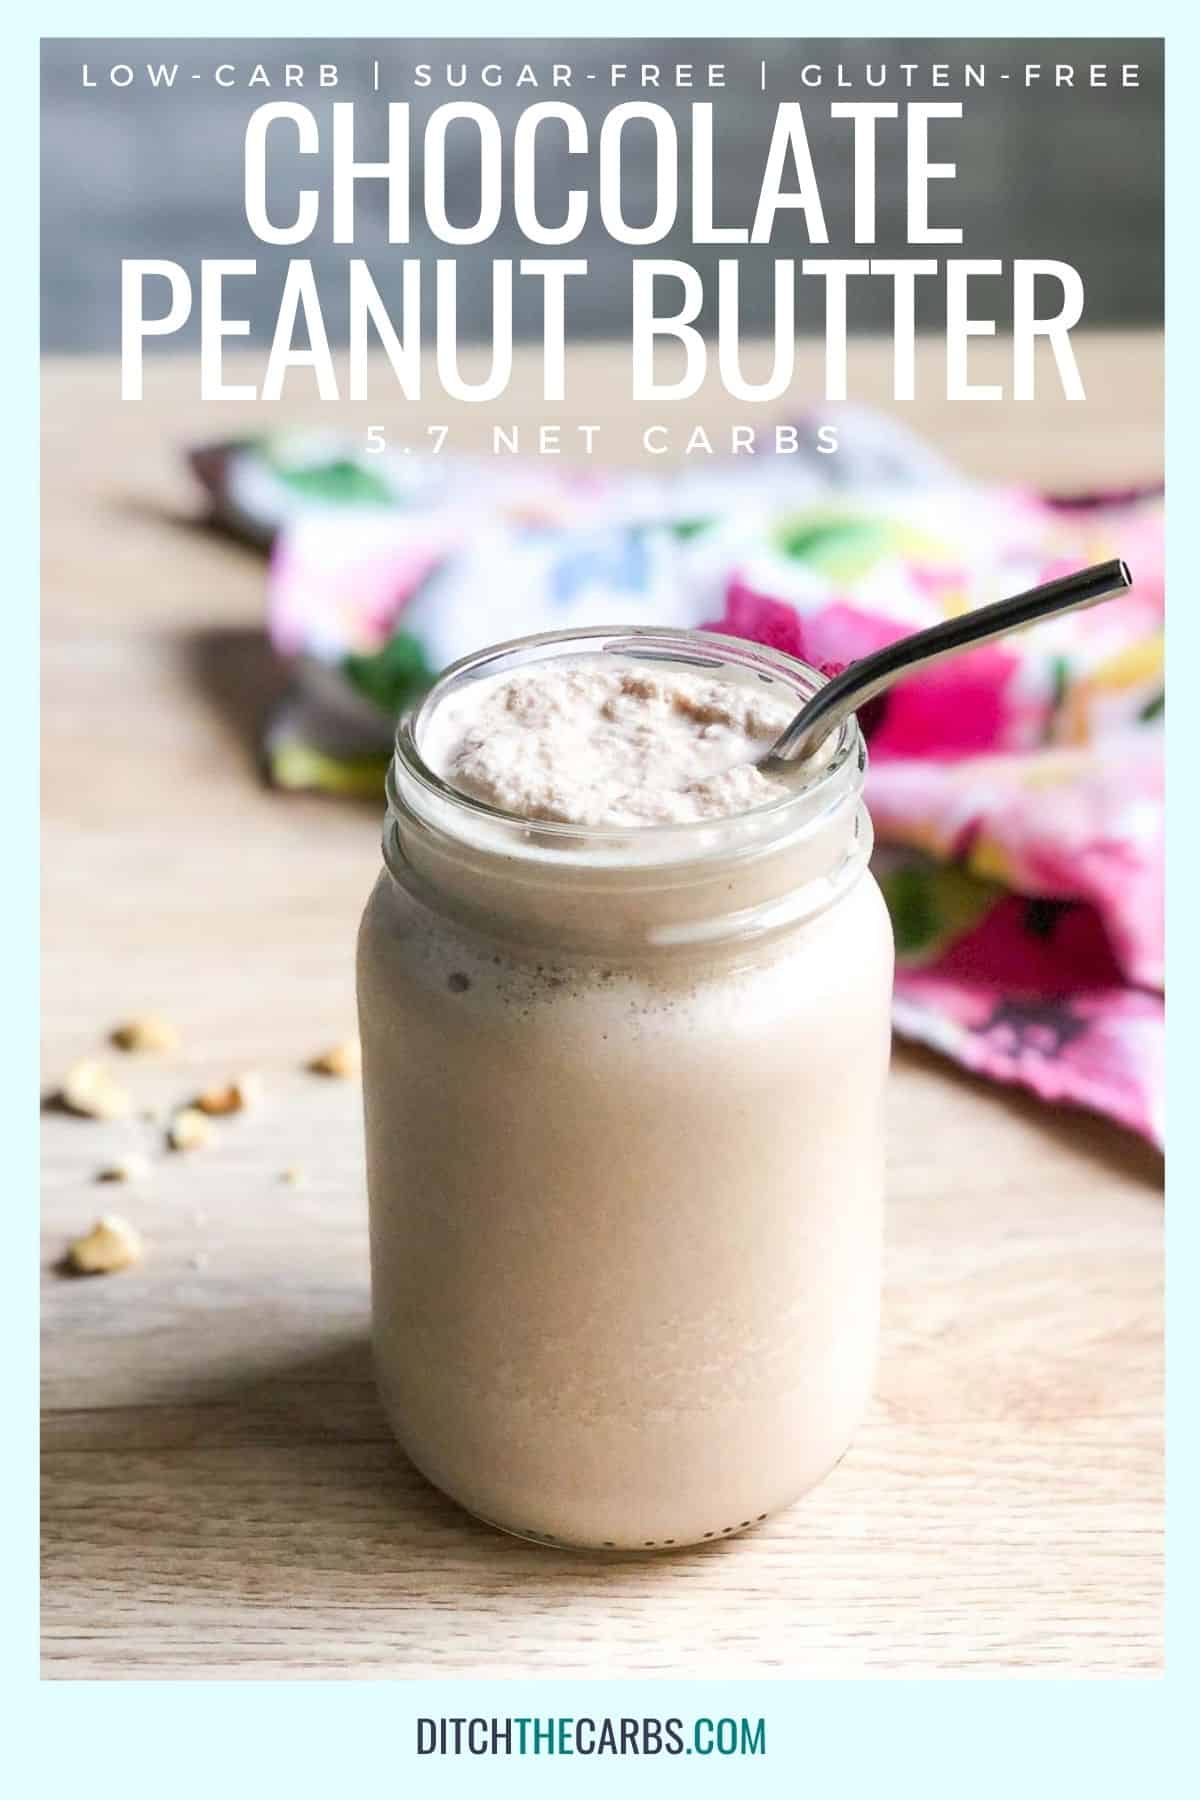 Keto chocolate peanut butter smoothie in a clear glass jar with a metal straw. Crushed peanuts are scattered in the background with a flower patterned towel.